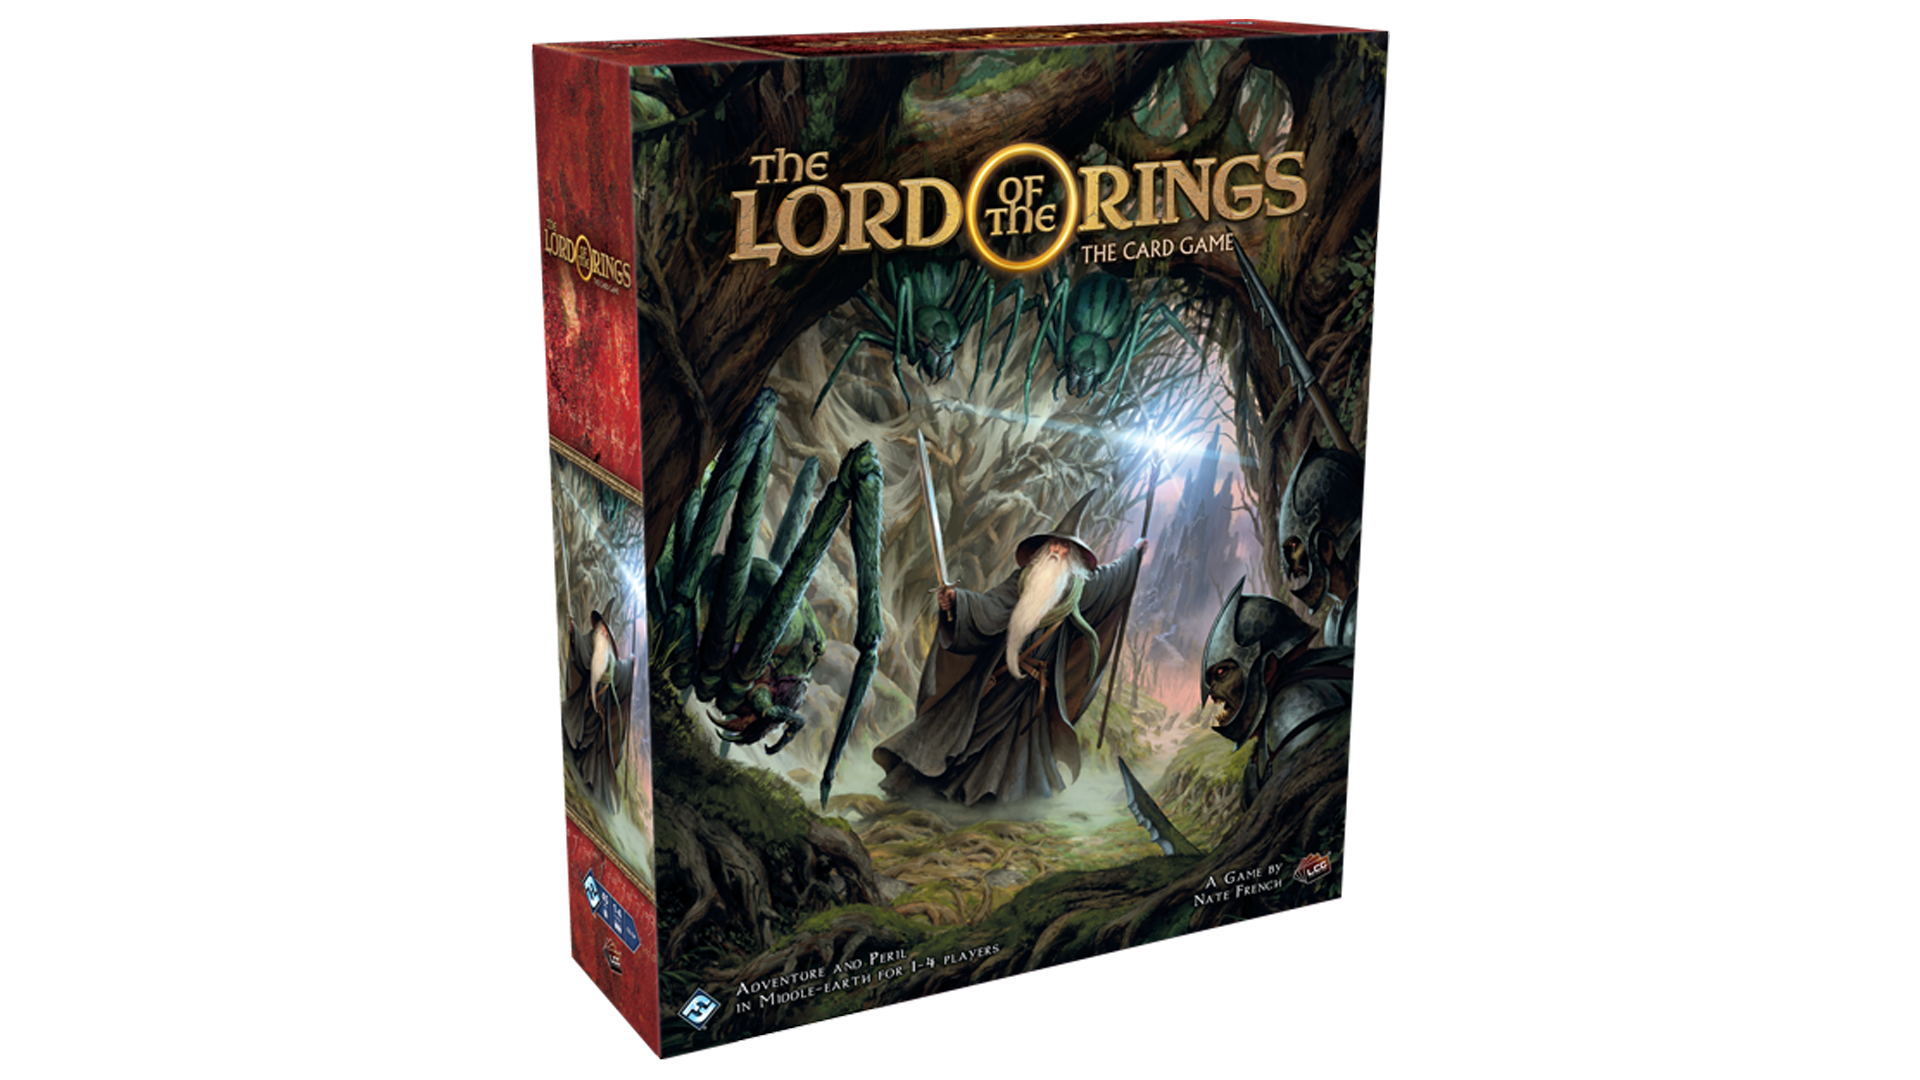 for sale online The Hobbit by Fantasy Flight Games Staff 2011, Game 